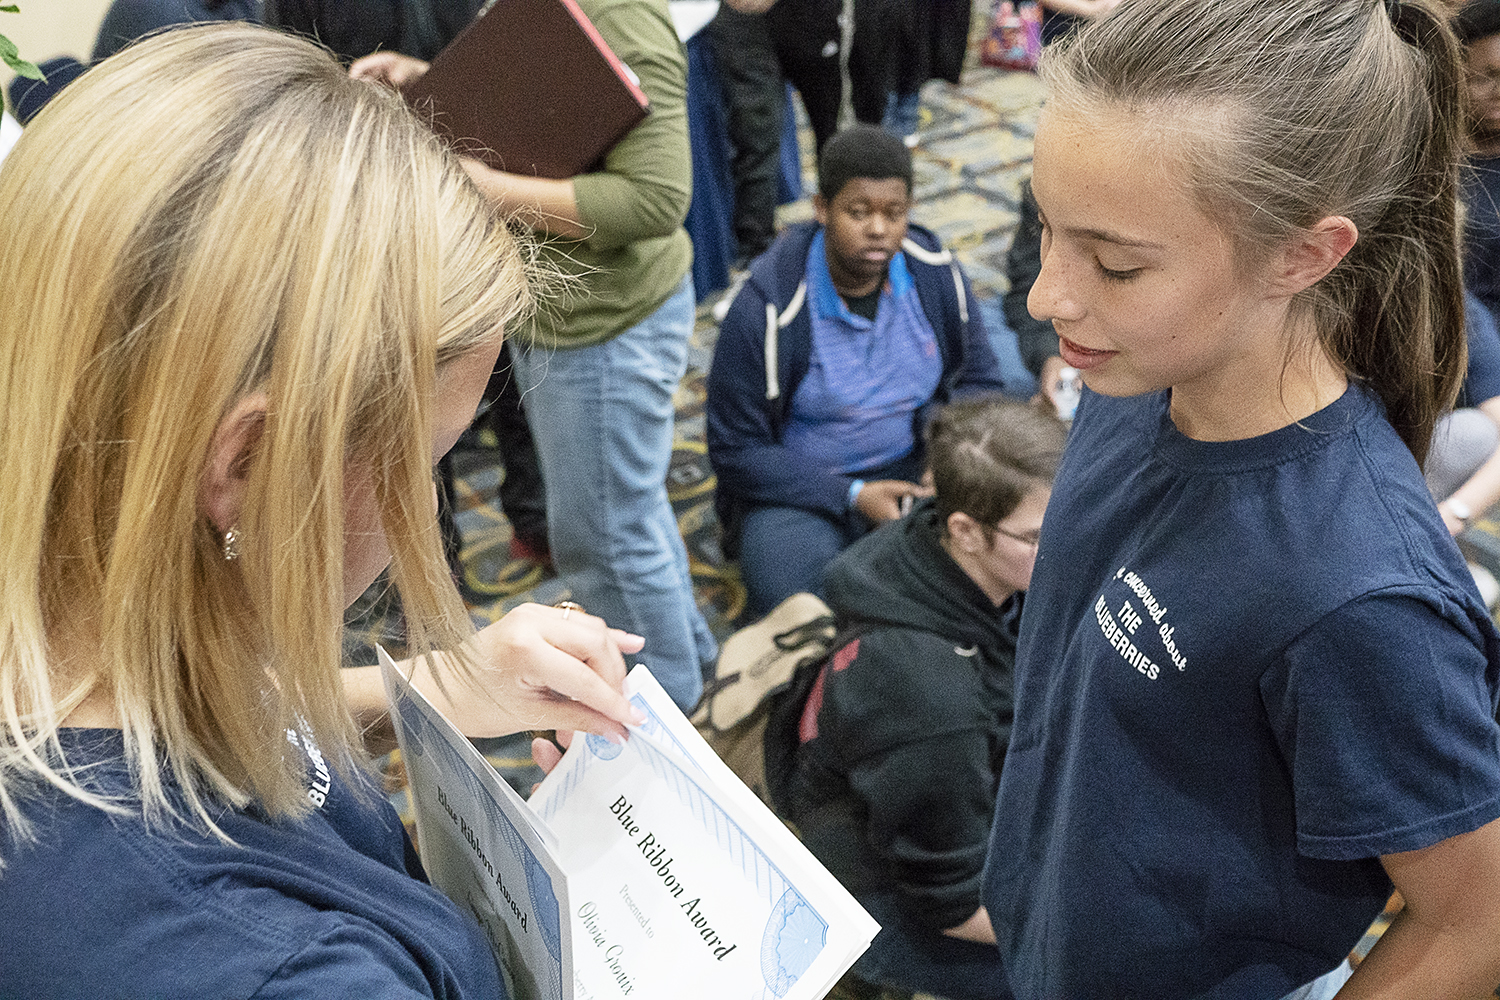 Flint, MI - Friday, May 4, 2018: University of Michigan - Flint student Carryn White, 19, from Burton hands out a Blue Ribbon Award to Olivia Grouix, a student at Flushing Middle School, during the 5th Annual Blueberry Ambassador Awards Party at the 